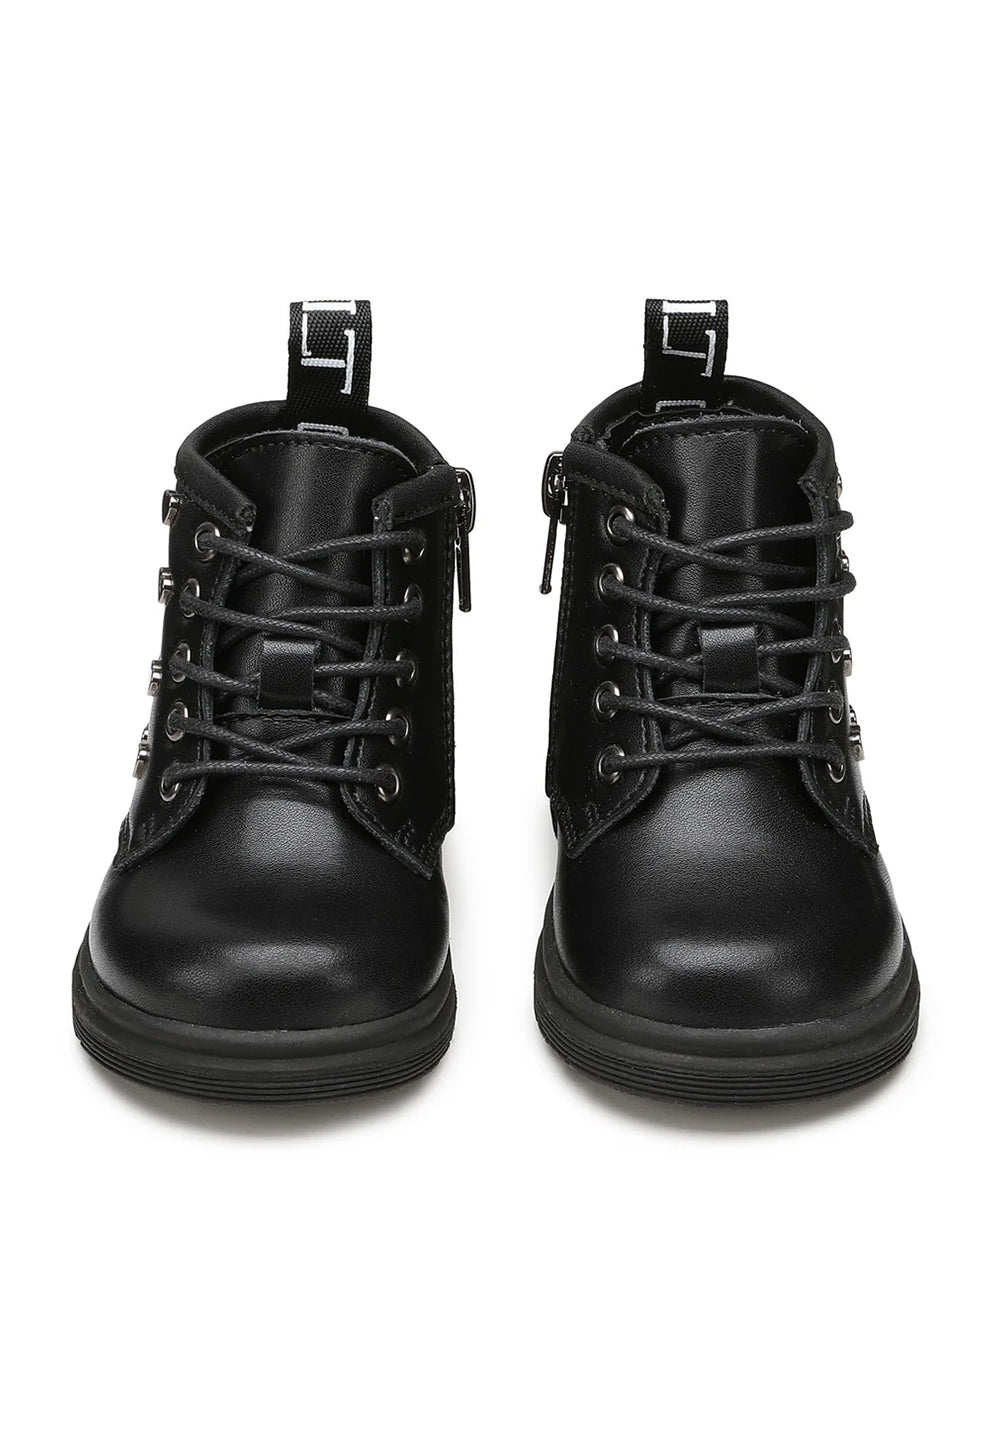 Black ankle boots for baby girls